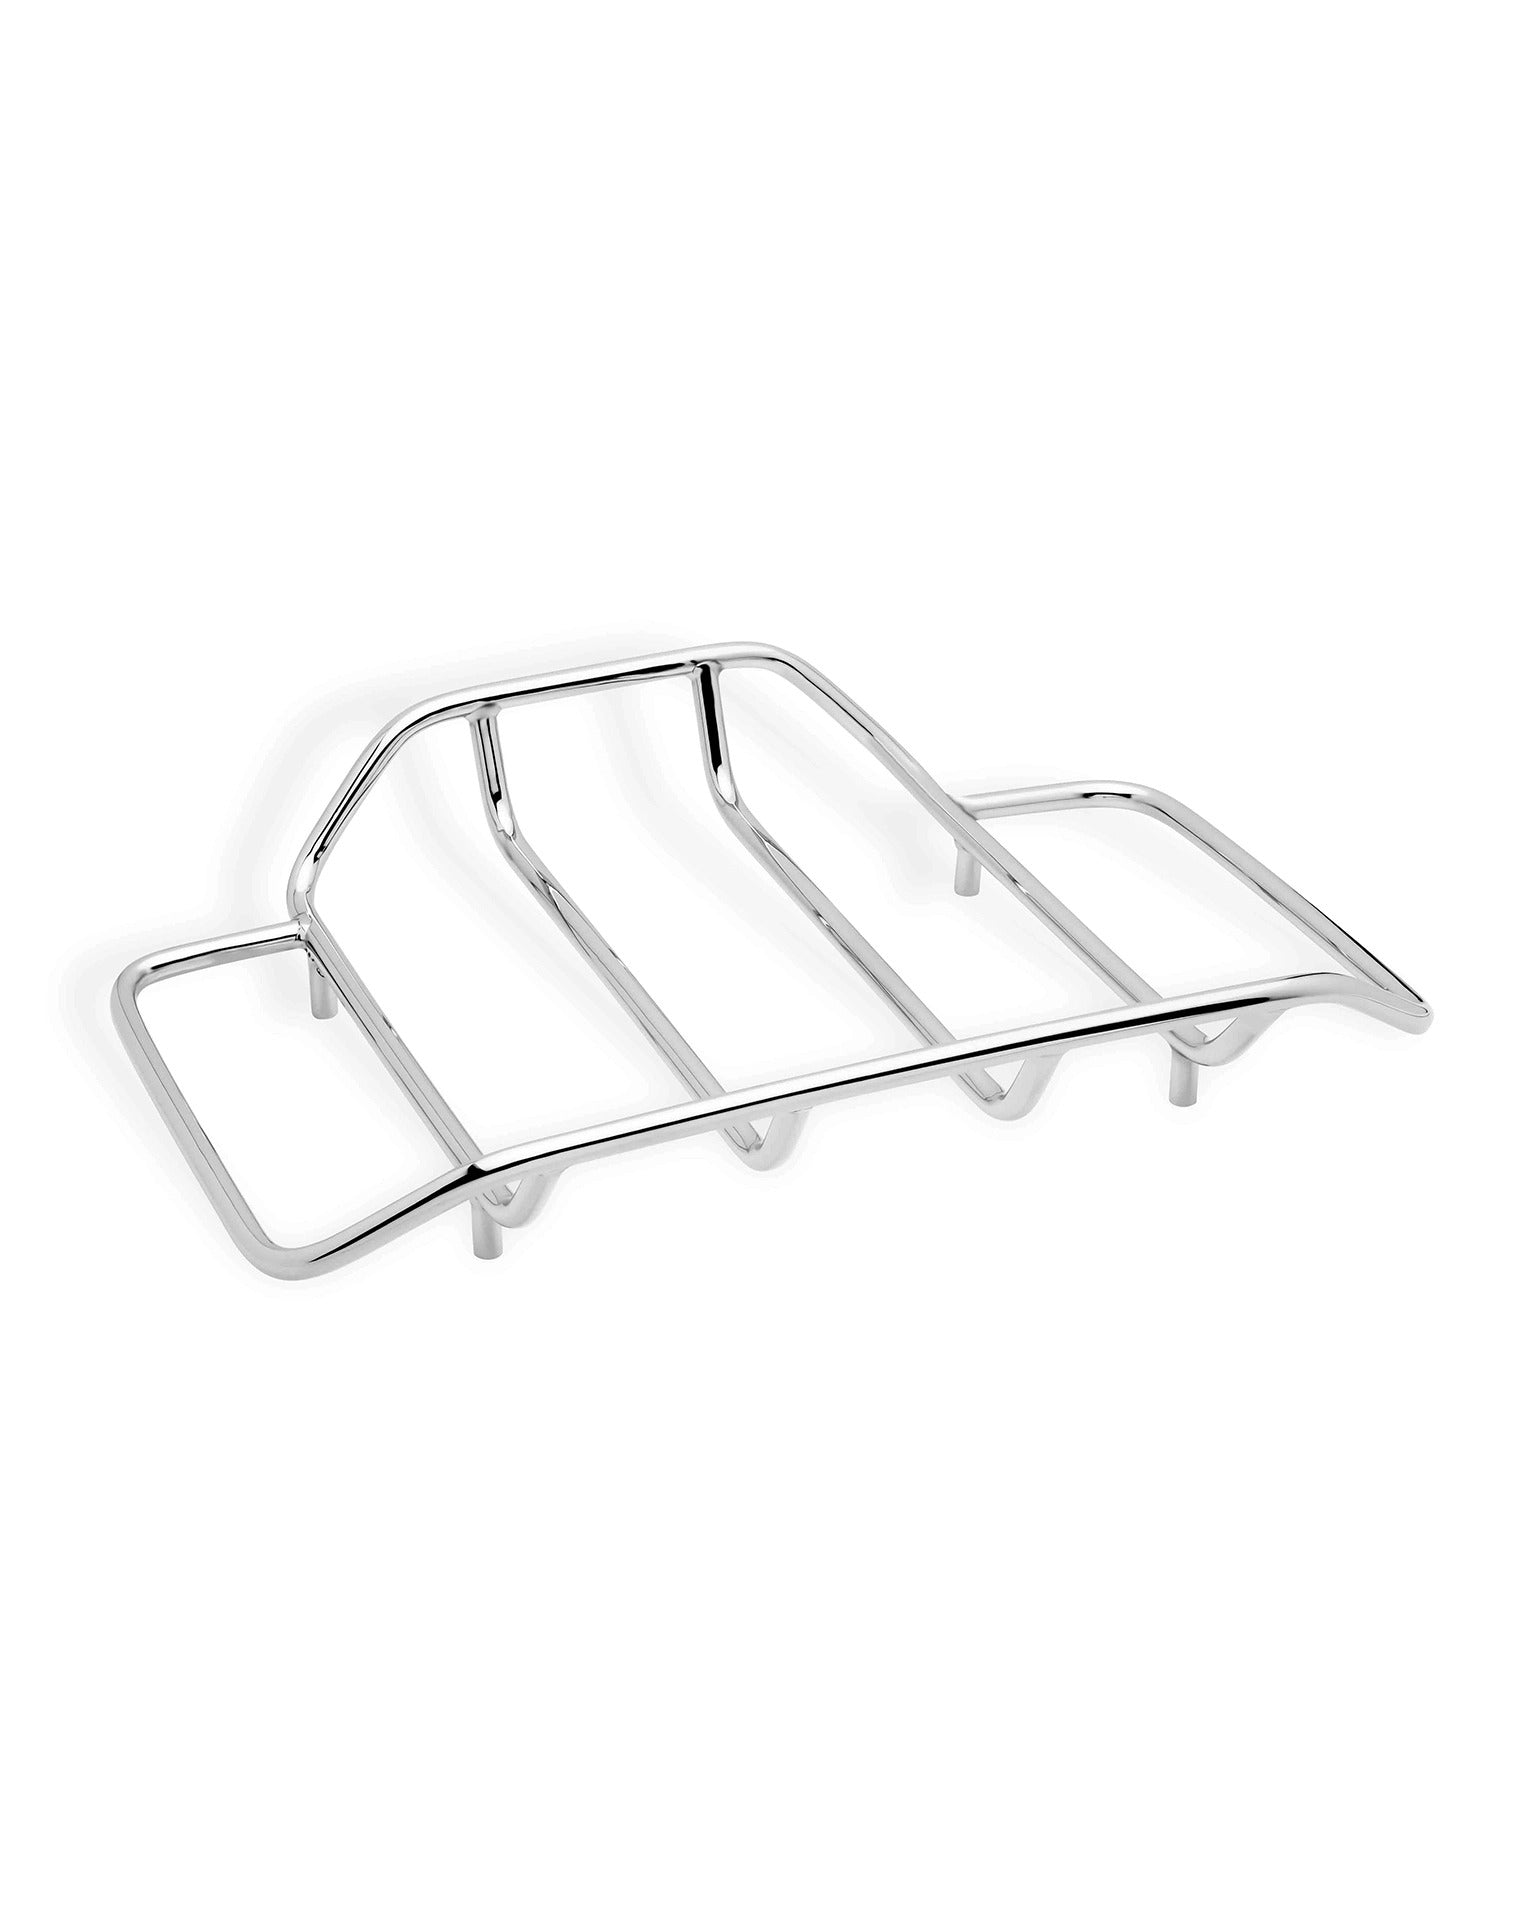 Viking Voyage Tour Pack Luggage Rack for Harley Electra Glide Chrome Front View